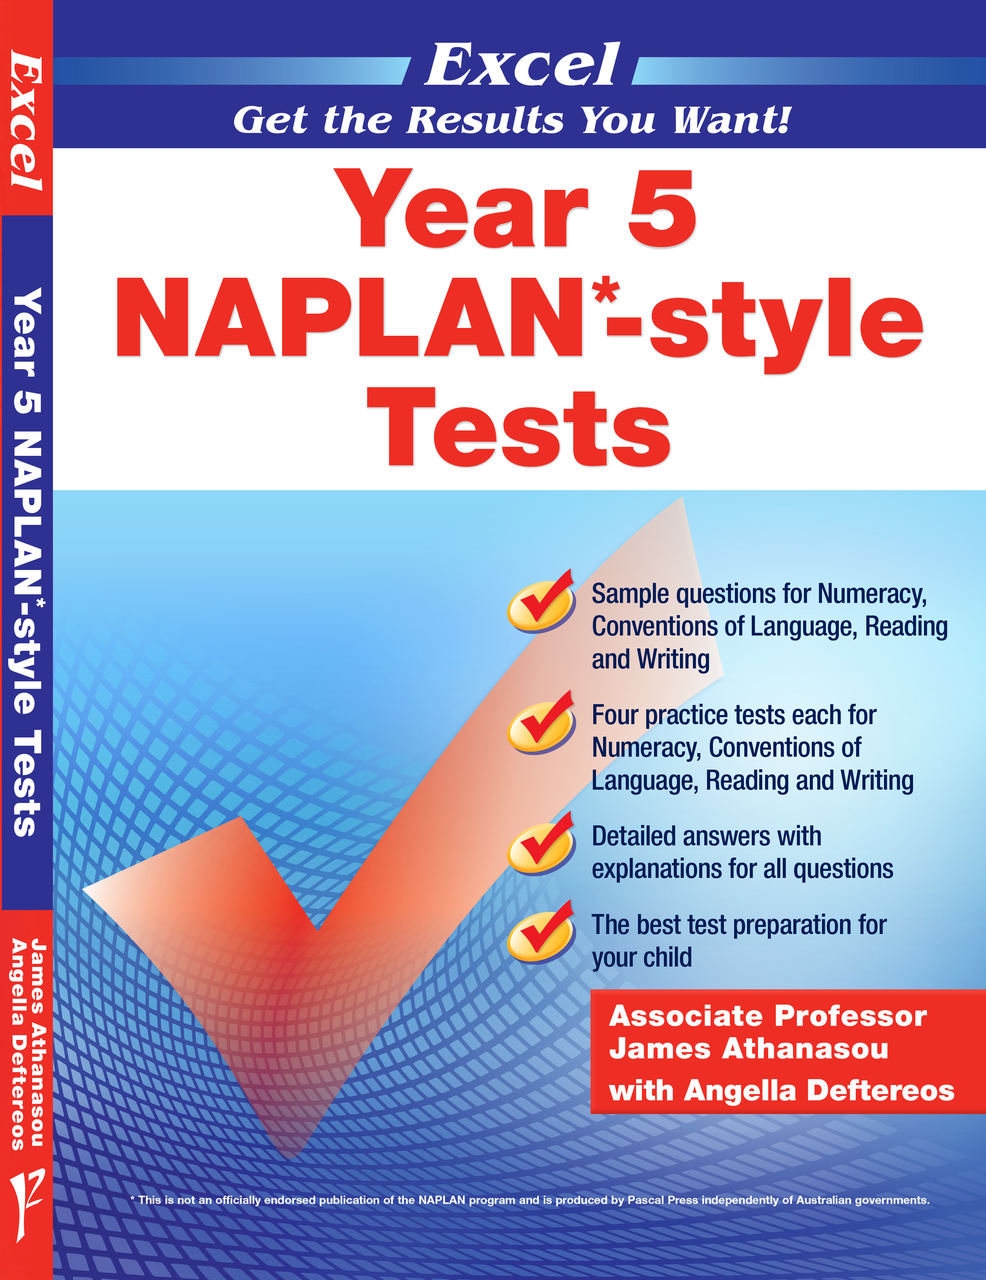 EXCEL - YEAR 5 NAPLAN*-STYLE TESTS